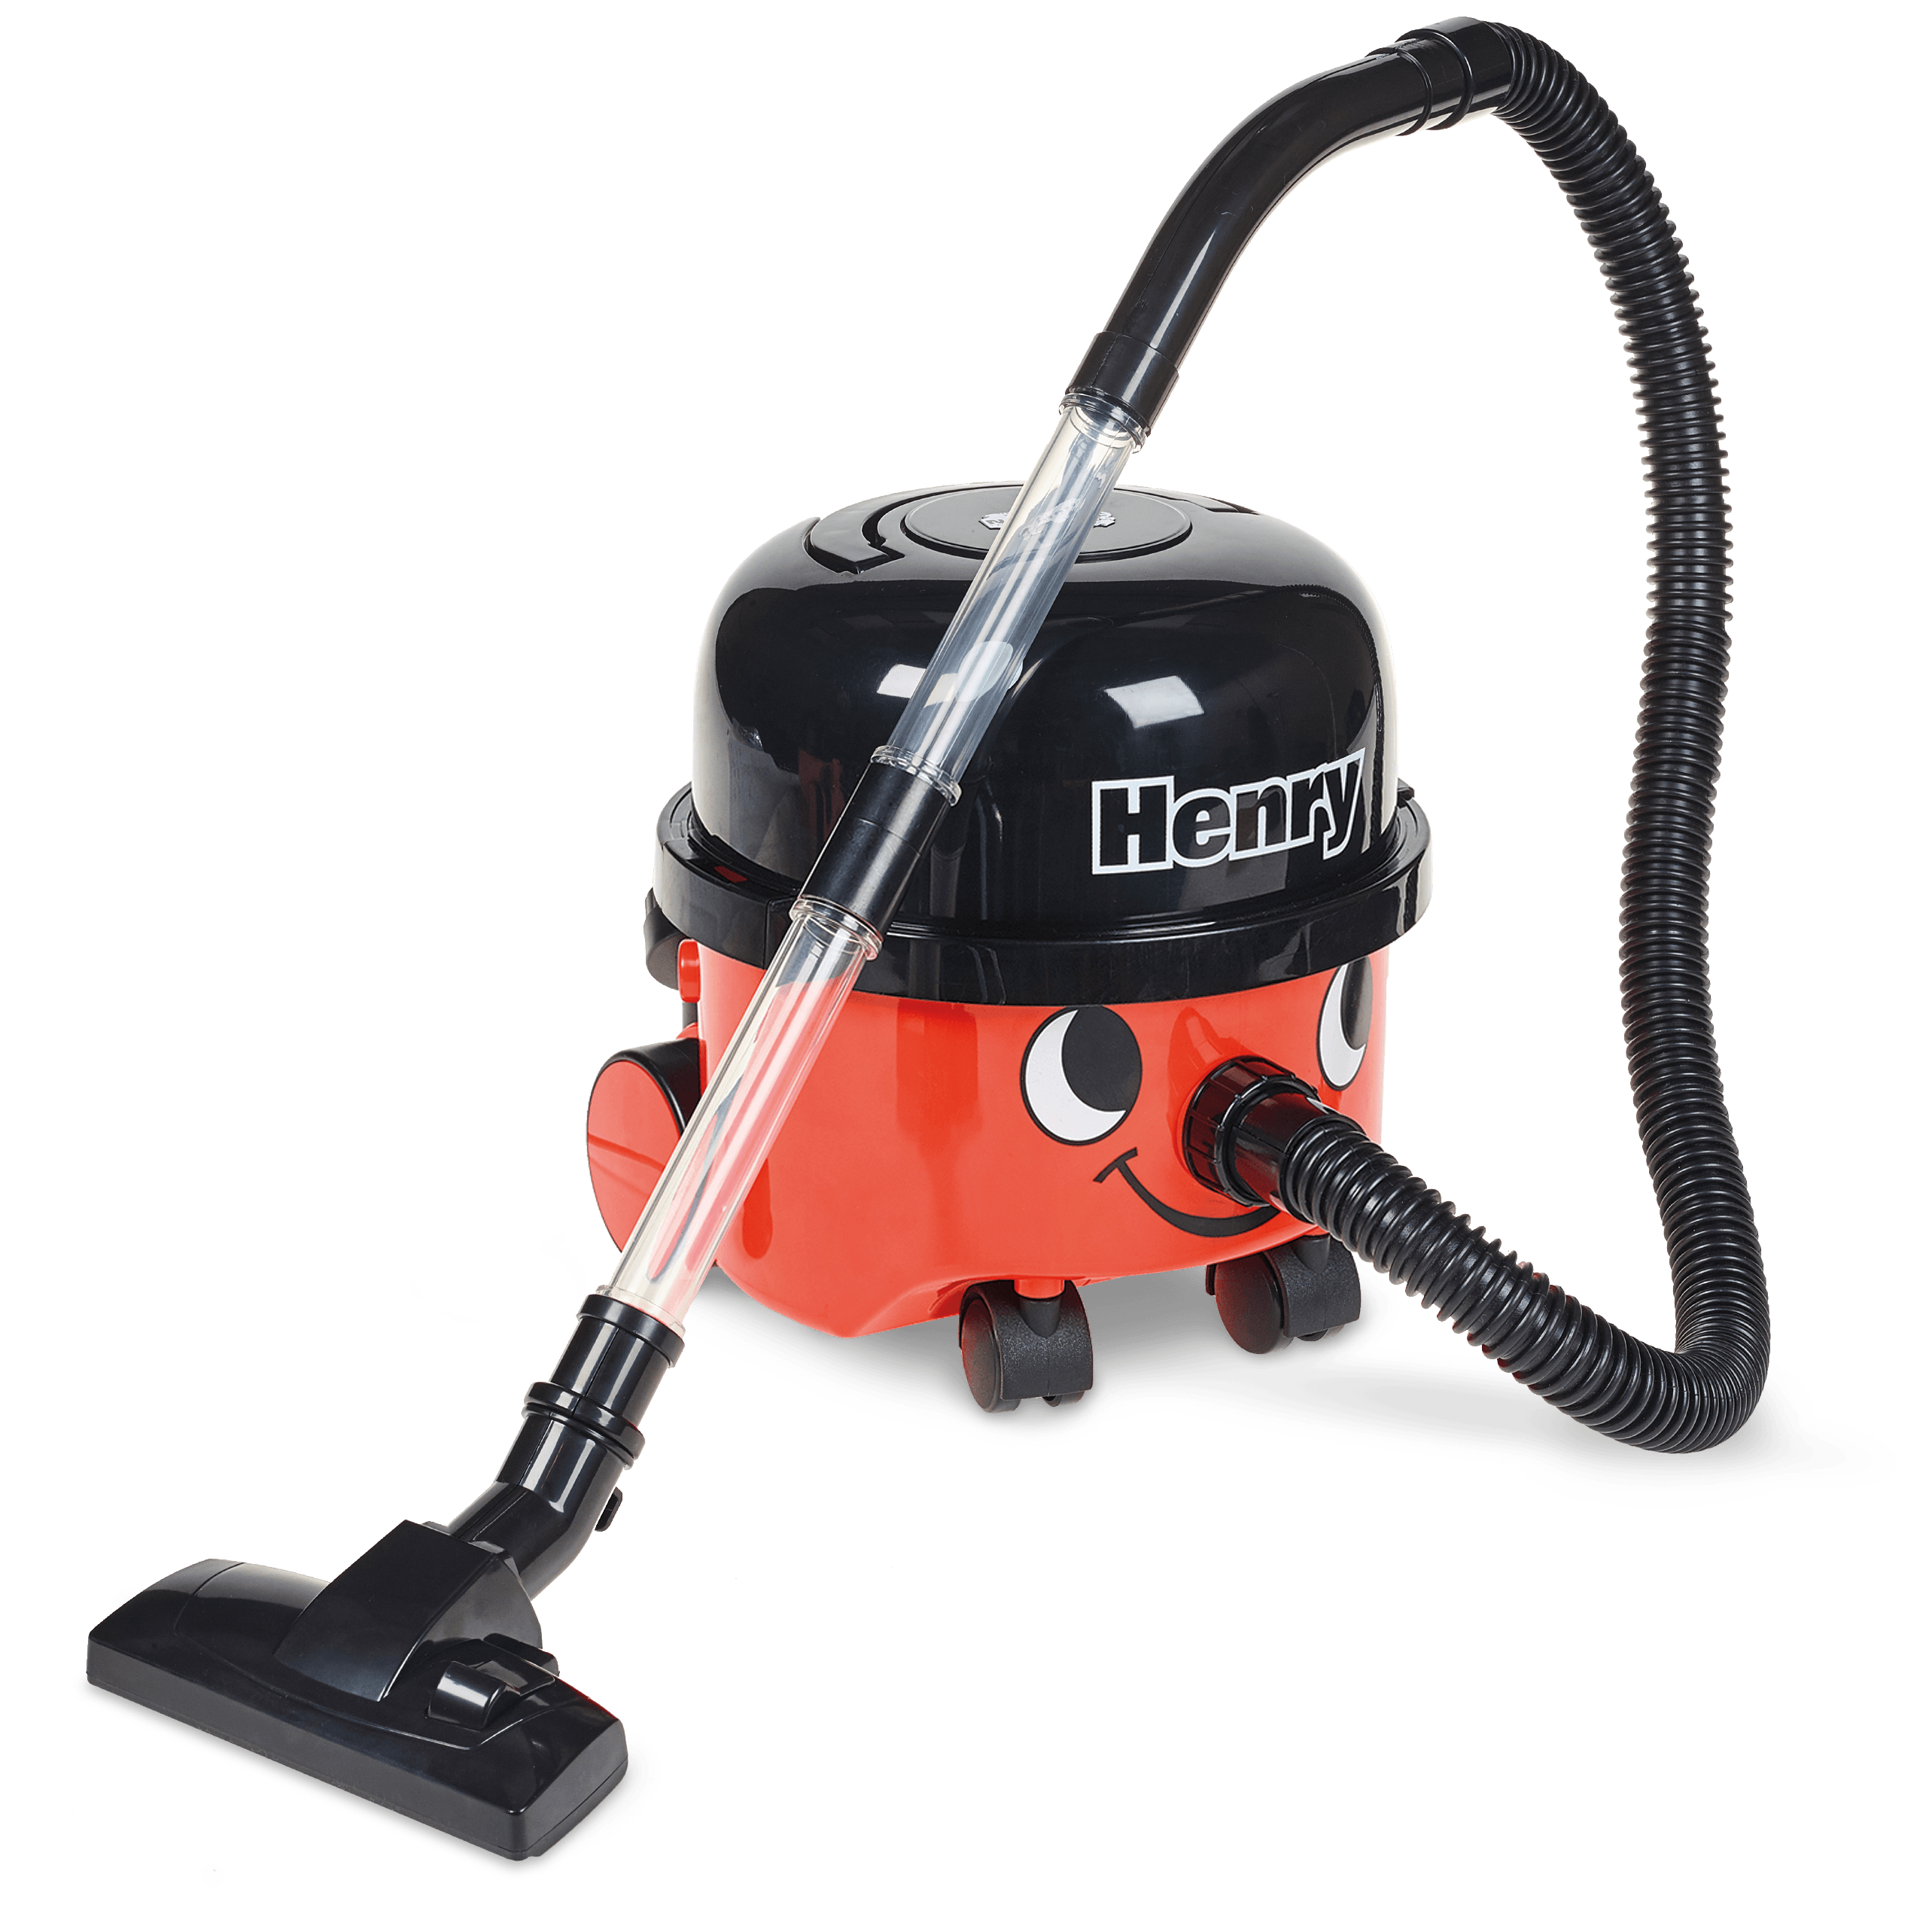 https://www.casdon.com/wp-content/uploads/2022/01/72860_3_Henry_VacuumCleaner_Product_CutoutWithshadow_2023.png